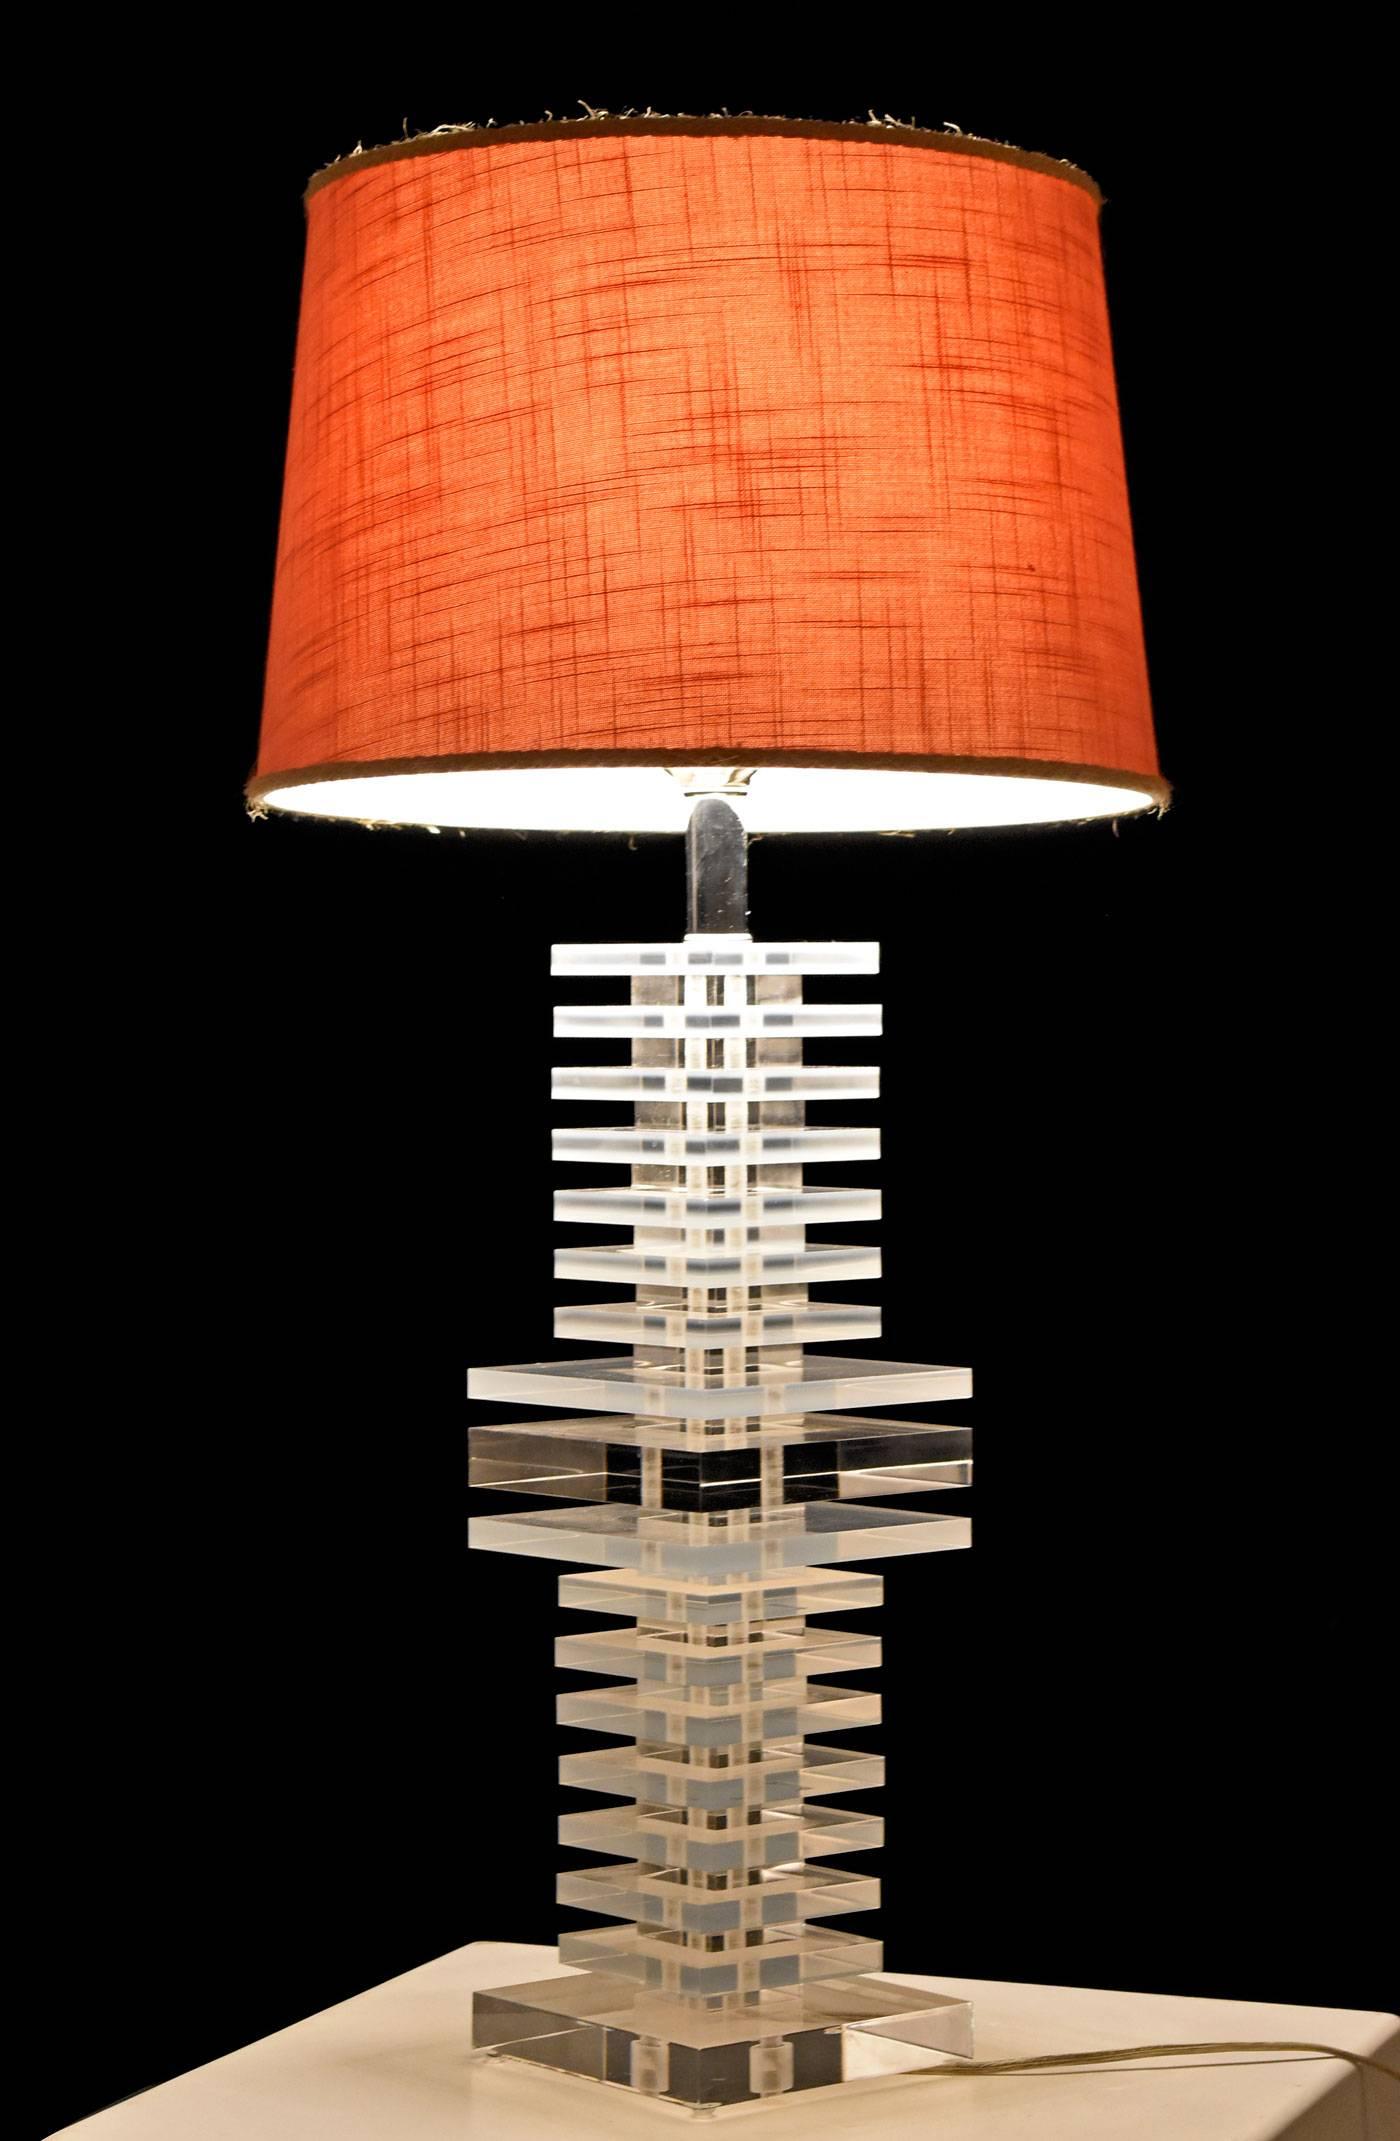 Beautiful Hollywood Regency style Mid-Century Modern Lucite acrylic lamp. Composed of stacked Lucite vertebrae squares on a chrome column spine. Signed by Marlee. Original chrome hardware and pink lamp shade. Works perfectly. The acrylic, chrome and